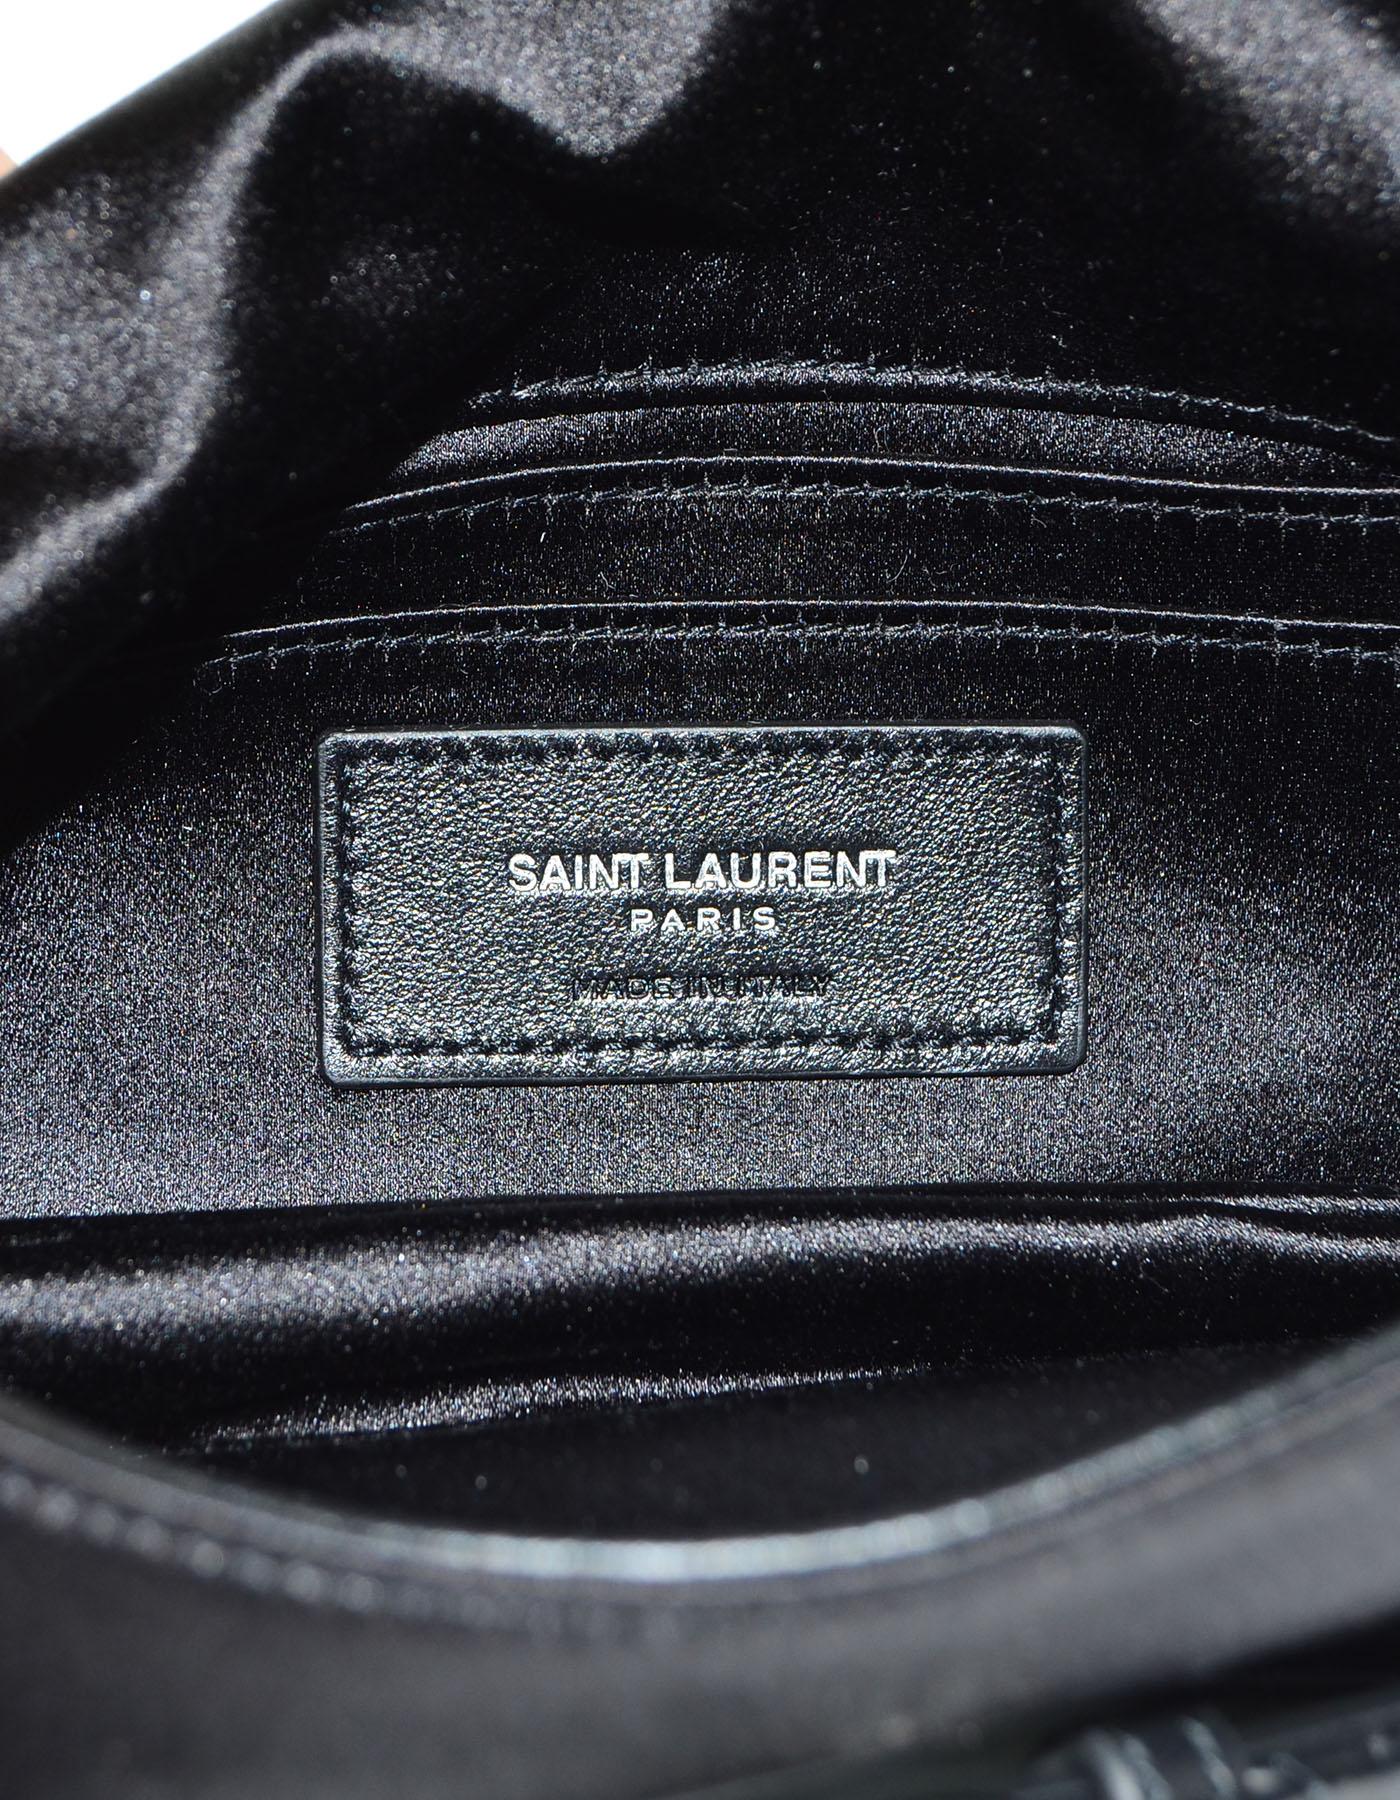 Saint Laurent Black/Silver Sequin Toy West Hollywood Crossbody Bag with DB 1